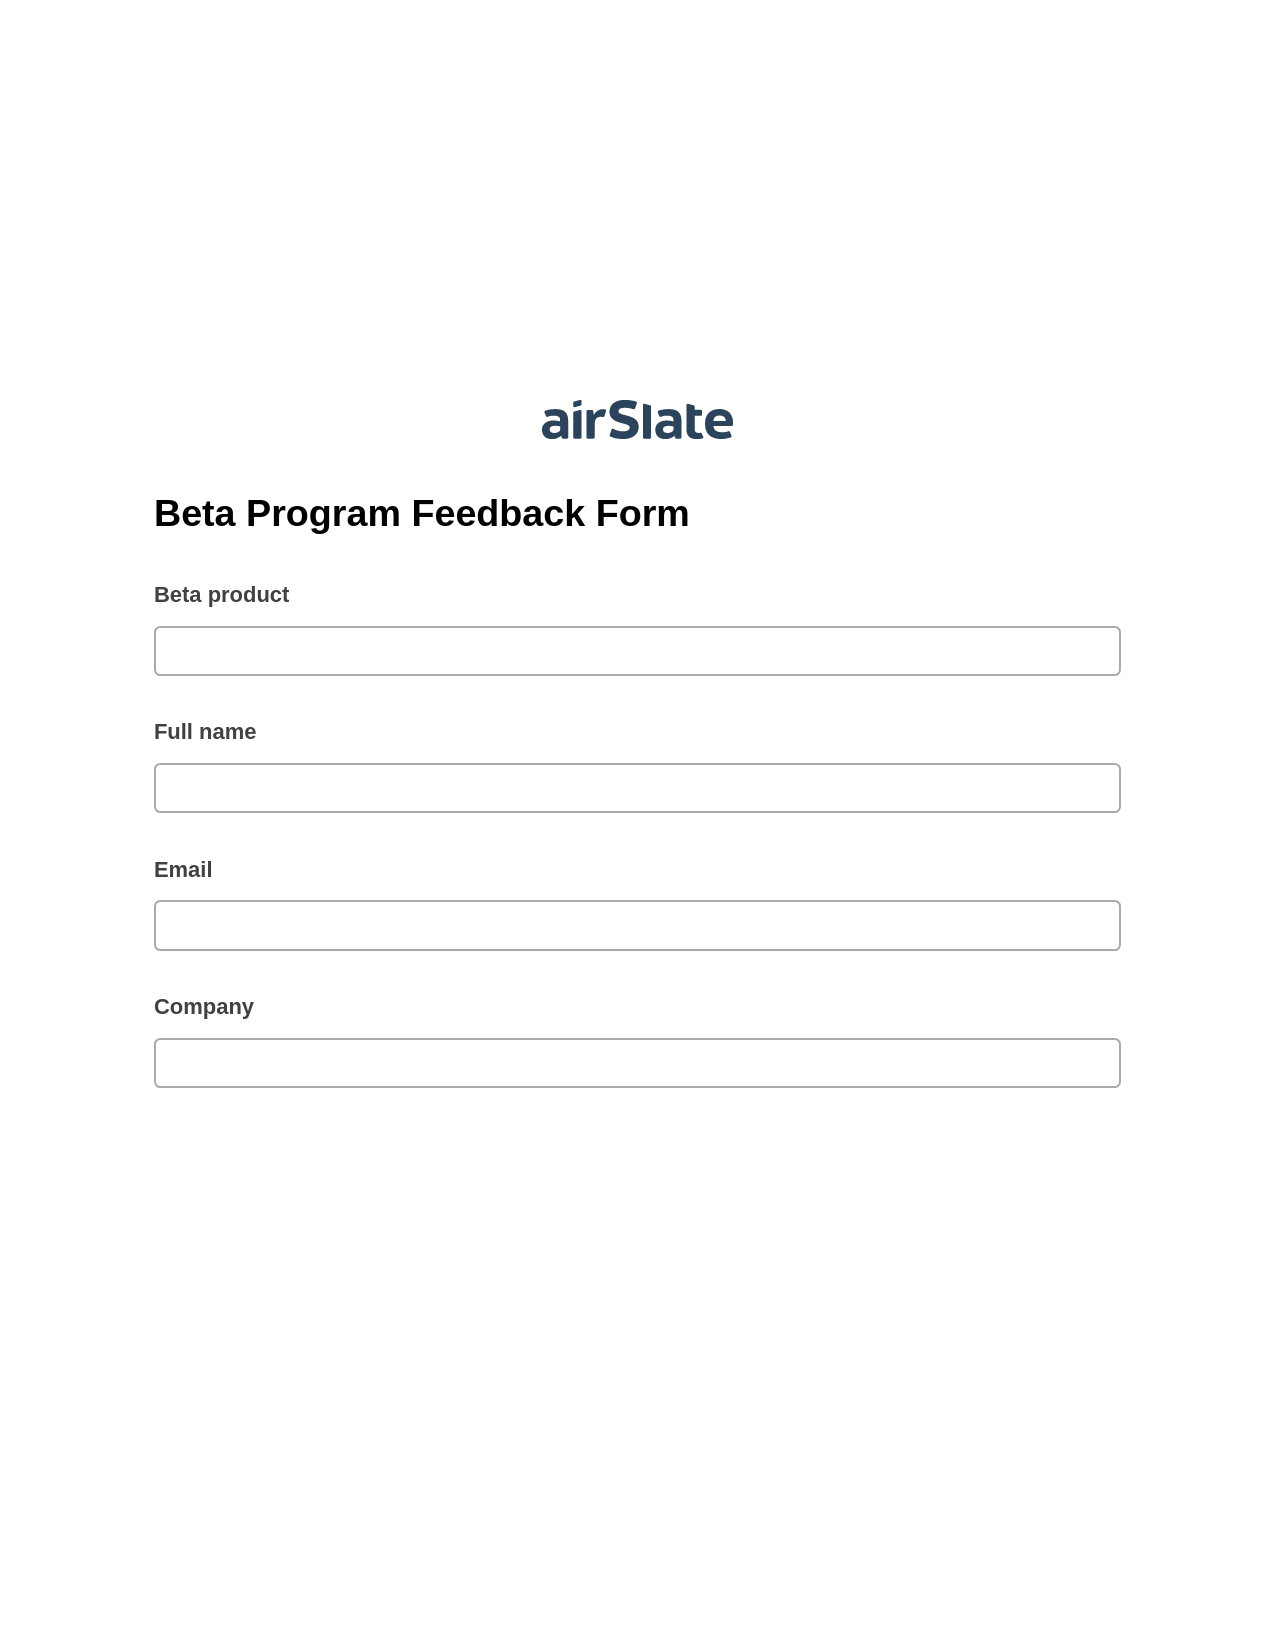 Beta Program Feedback Form Pre-fill from another Slate Bot, Add Tags to Slate Bot, Export to MySQL Bot